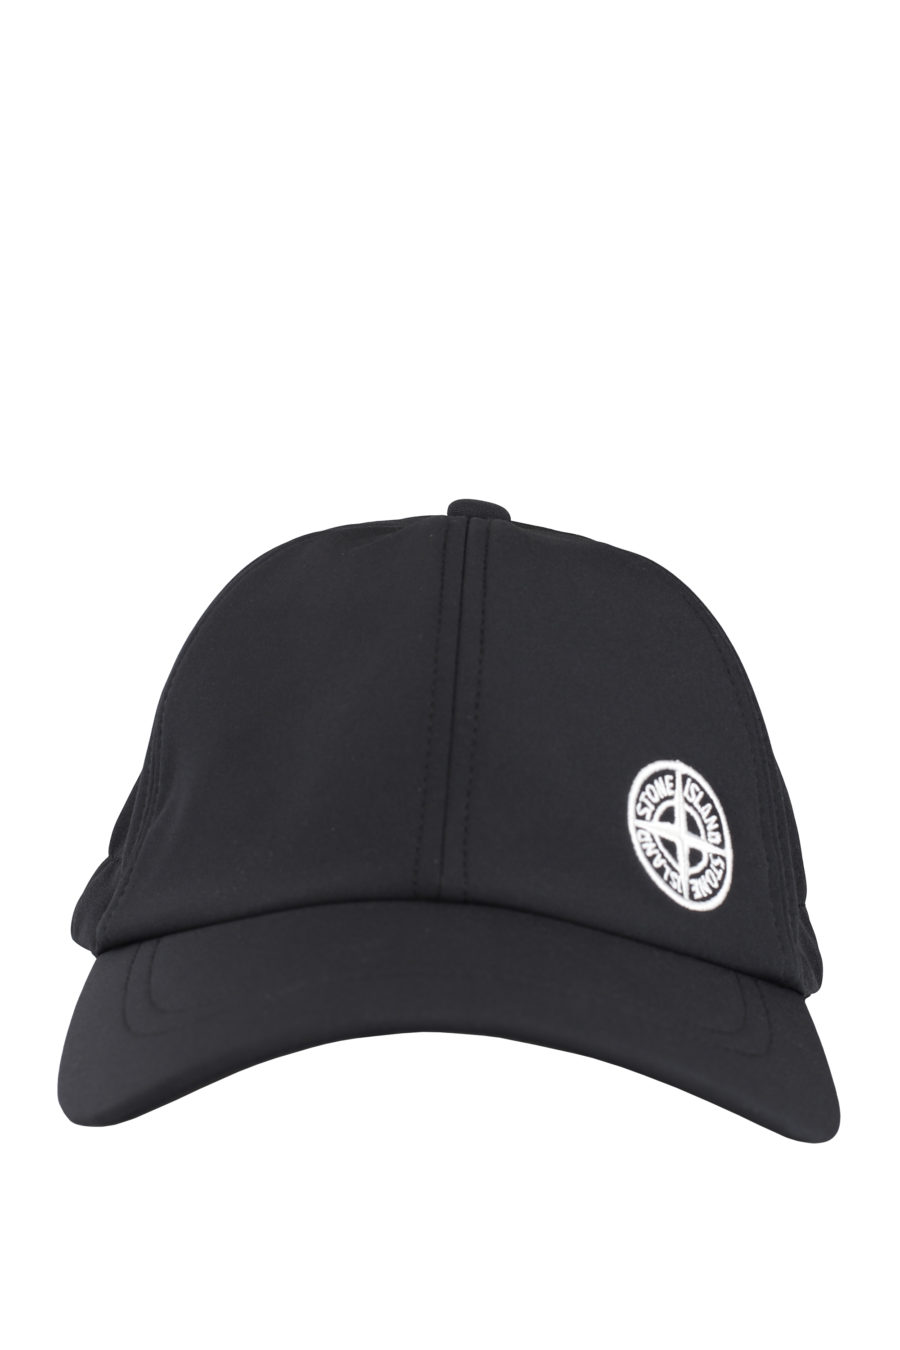 Black cap with white embroidered logo - IMG 9731